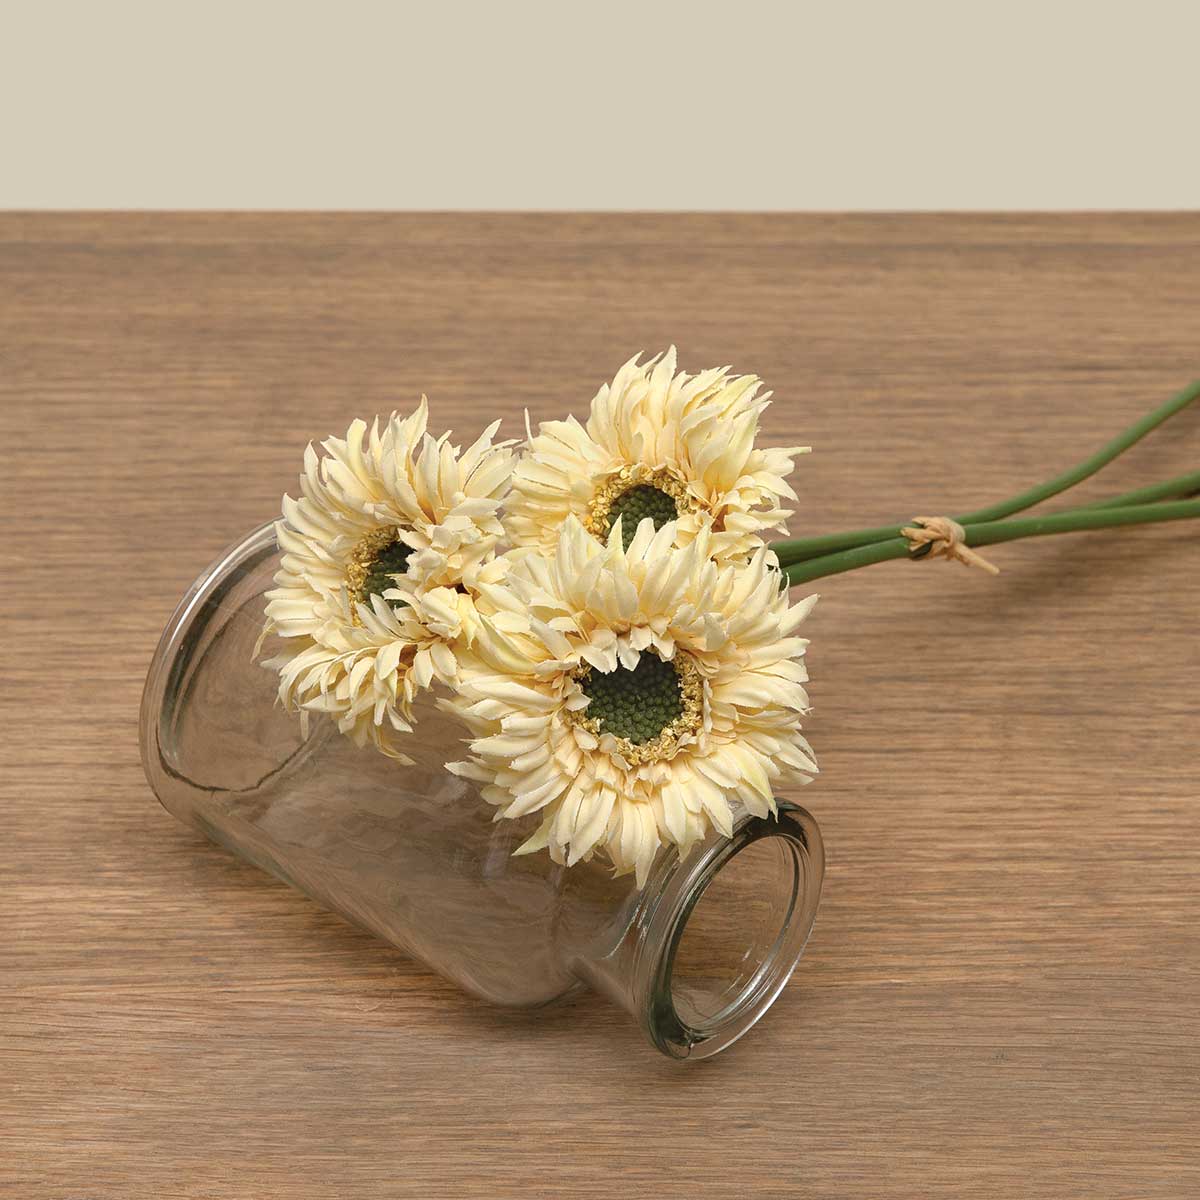 BUNDLE OF 3 GERBERA CREAM 2.5IN X 11IN POLYESTER TIED WITH RAFFI - Click Image to Close